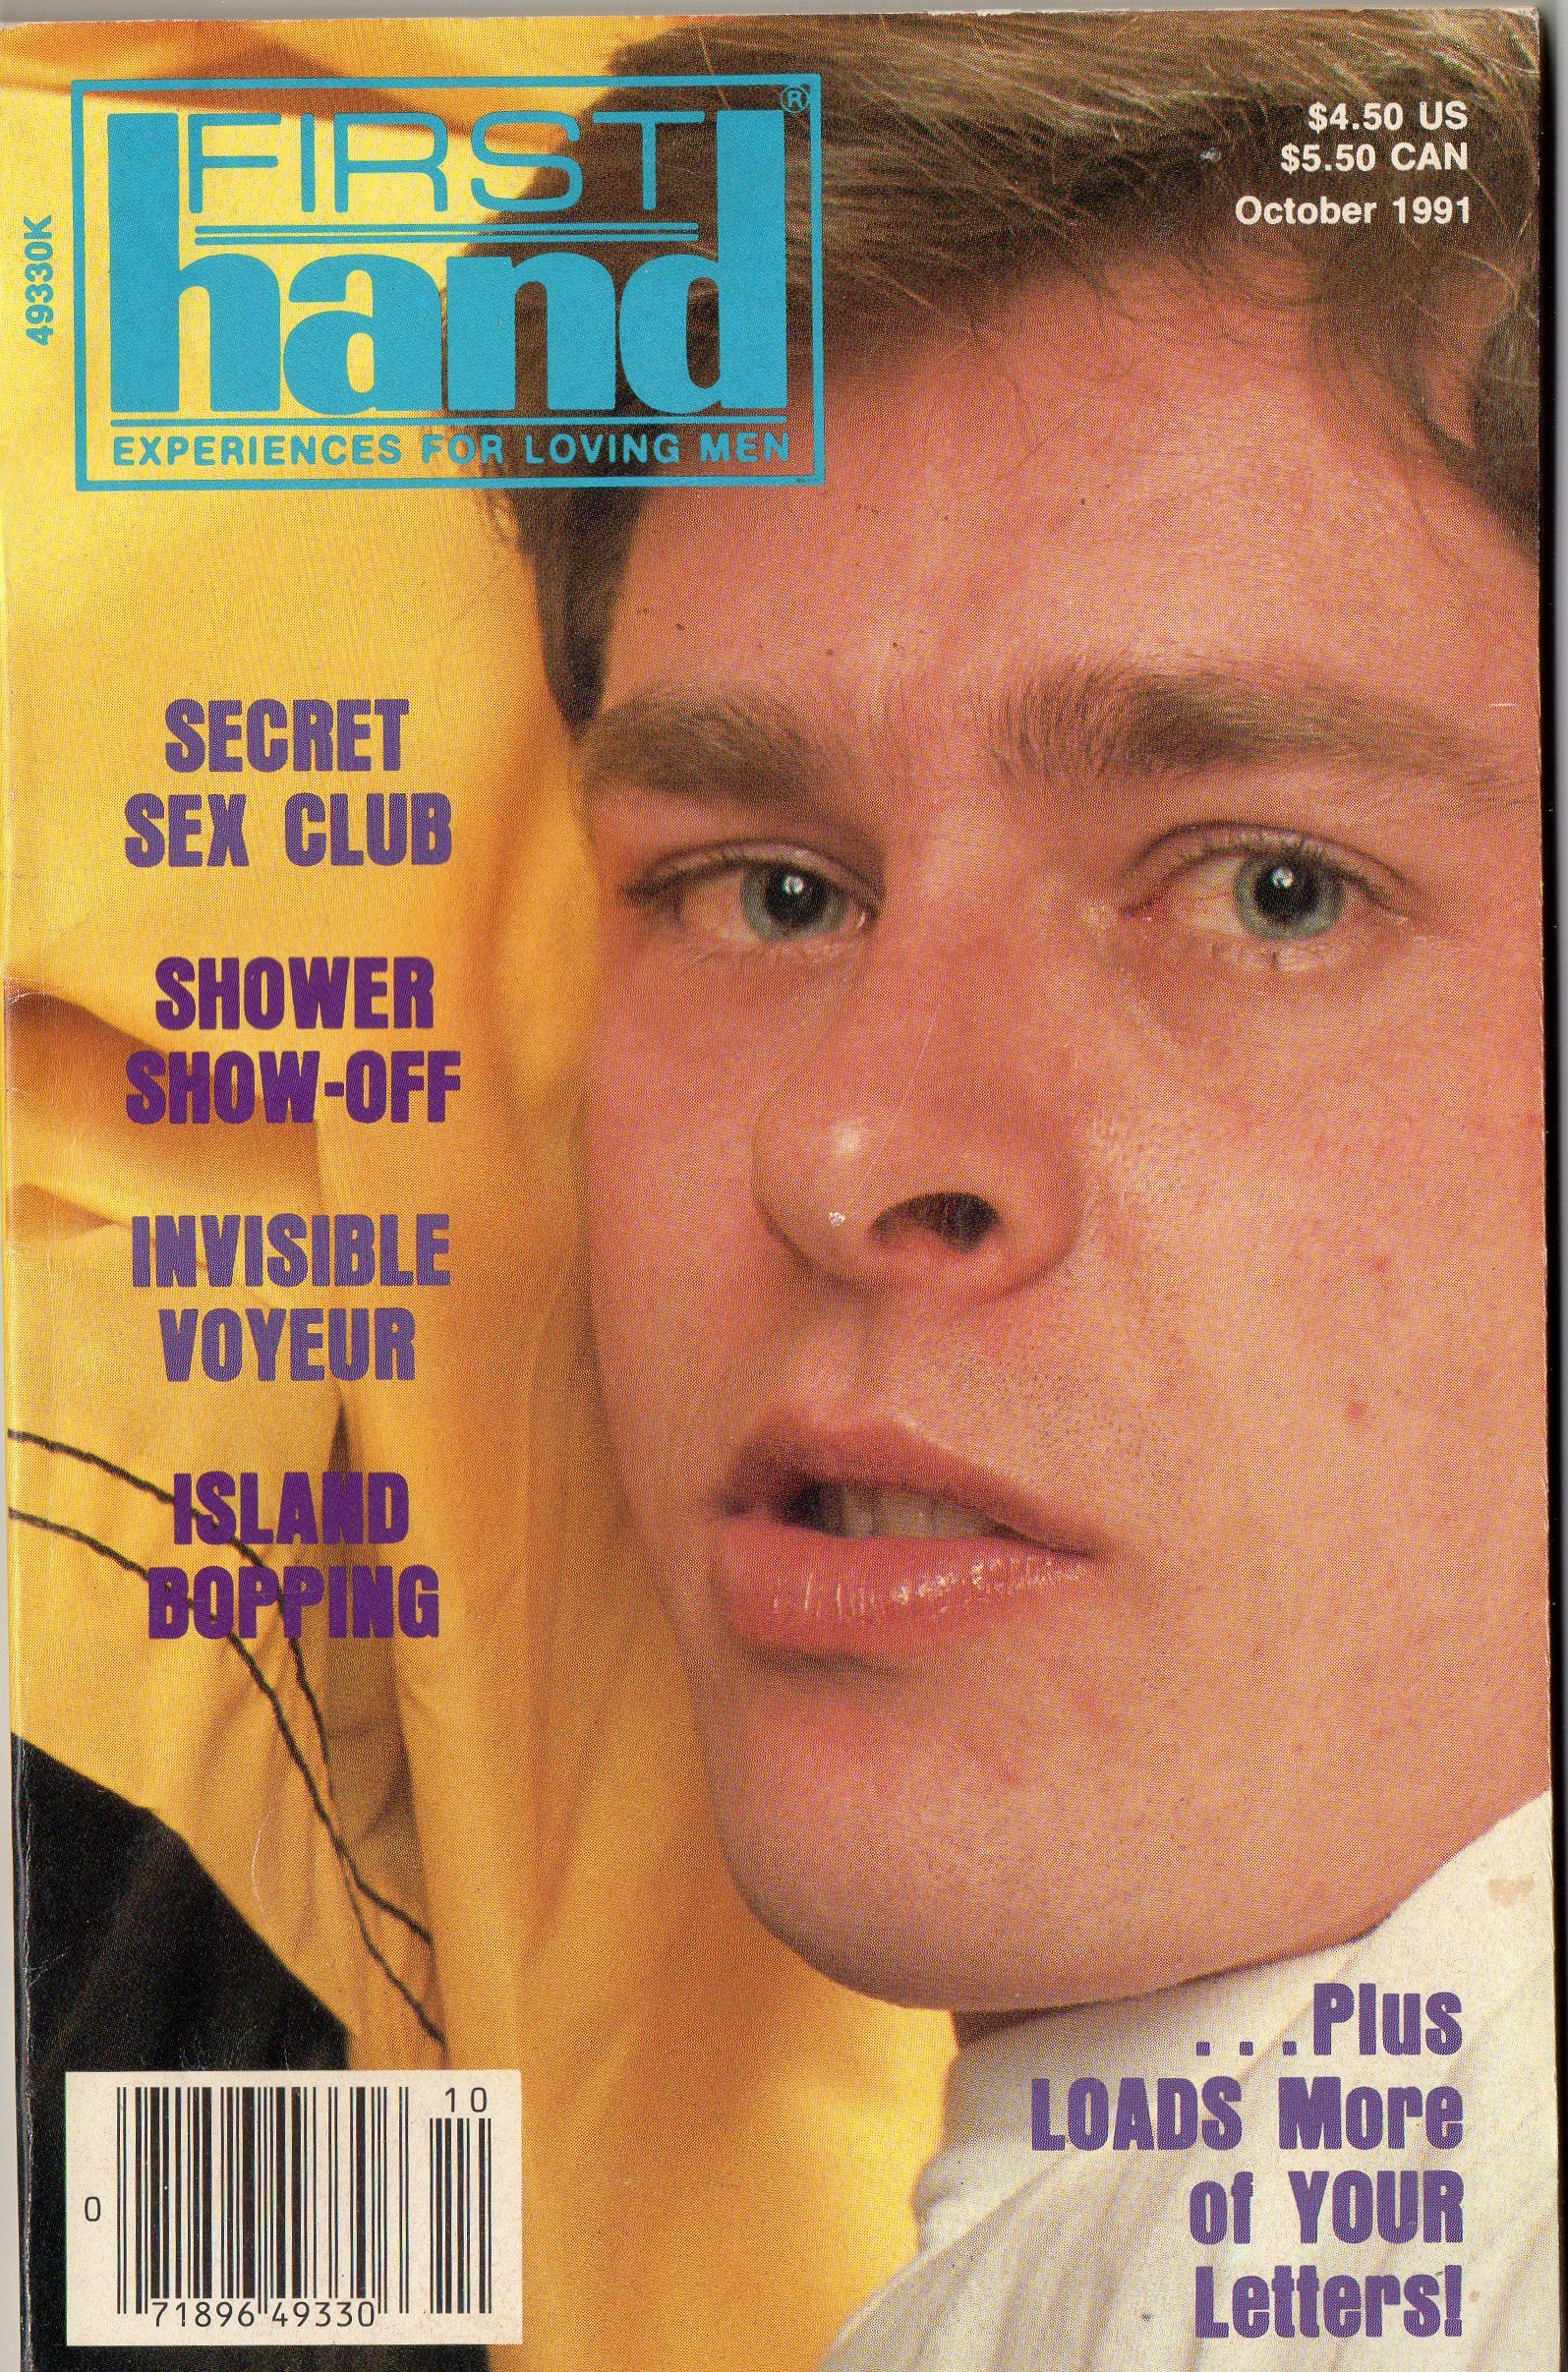 First Hand Experiences for Men (Volume 11 #10 1991 - Released October 1991) Gay Male Digest Magazine